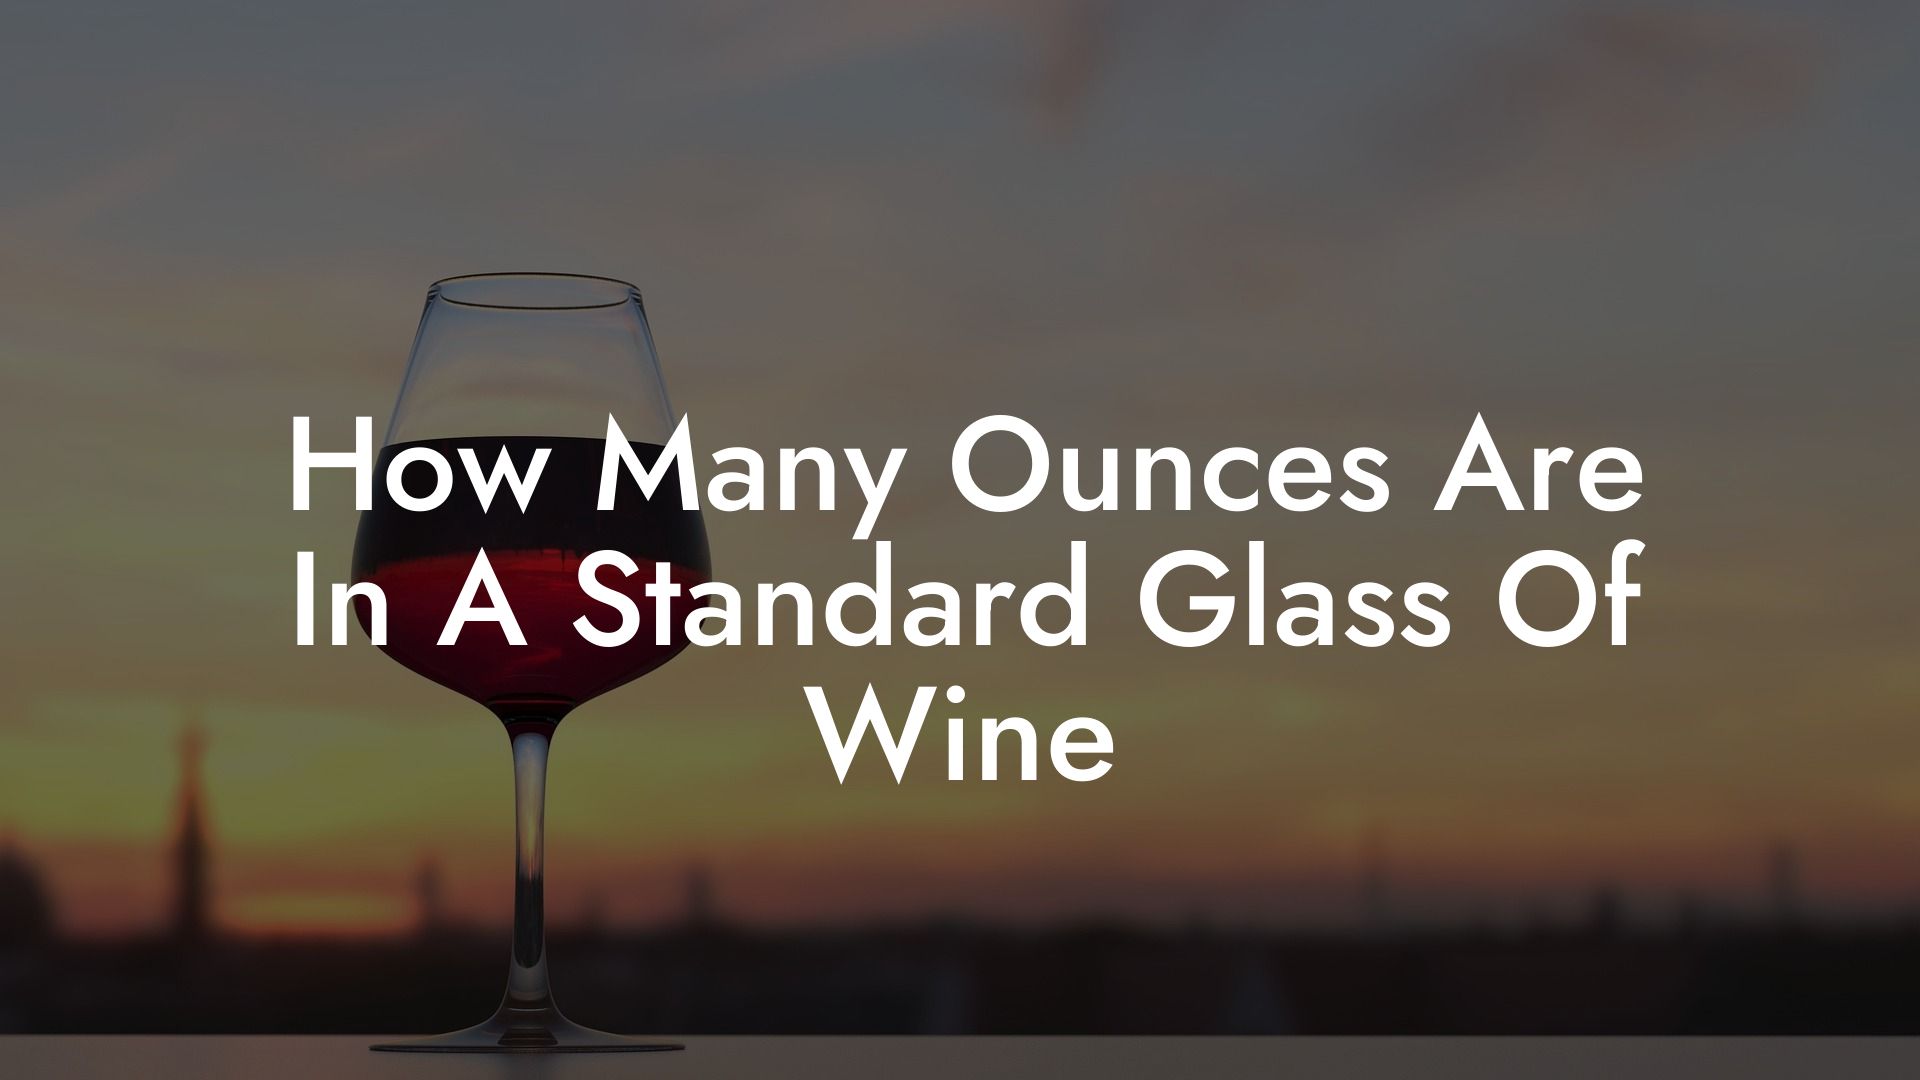 How Many Ounces Are In A Standard Glass Of Wine